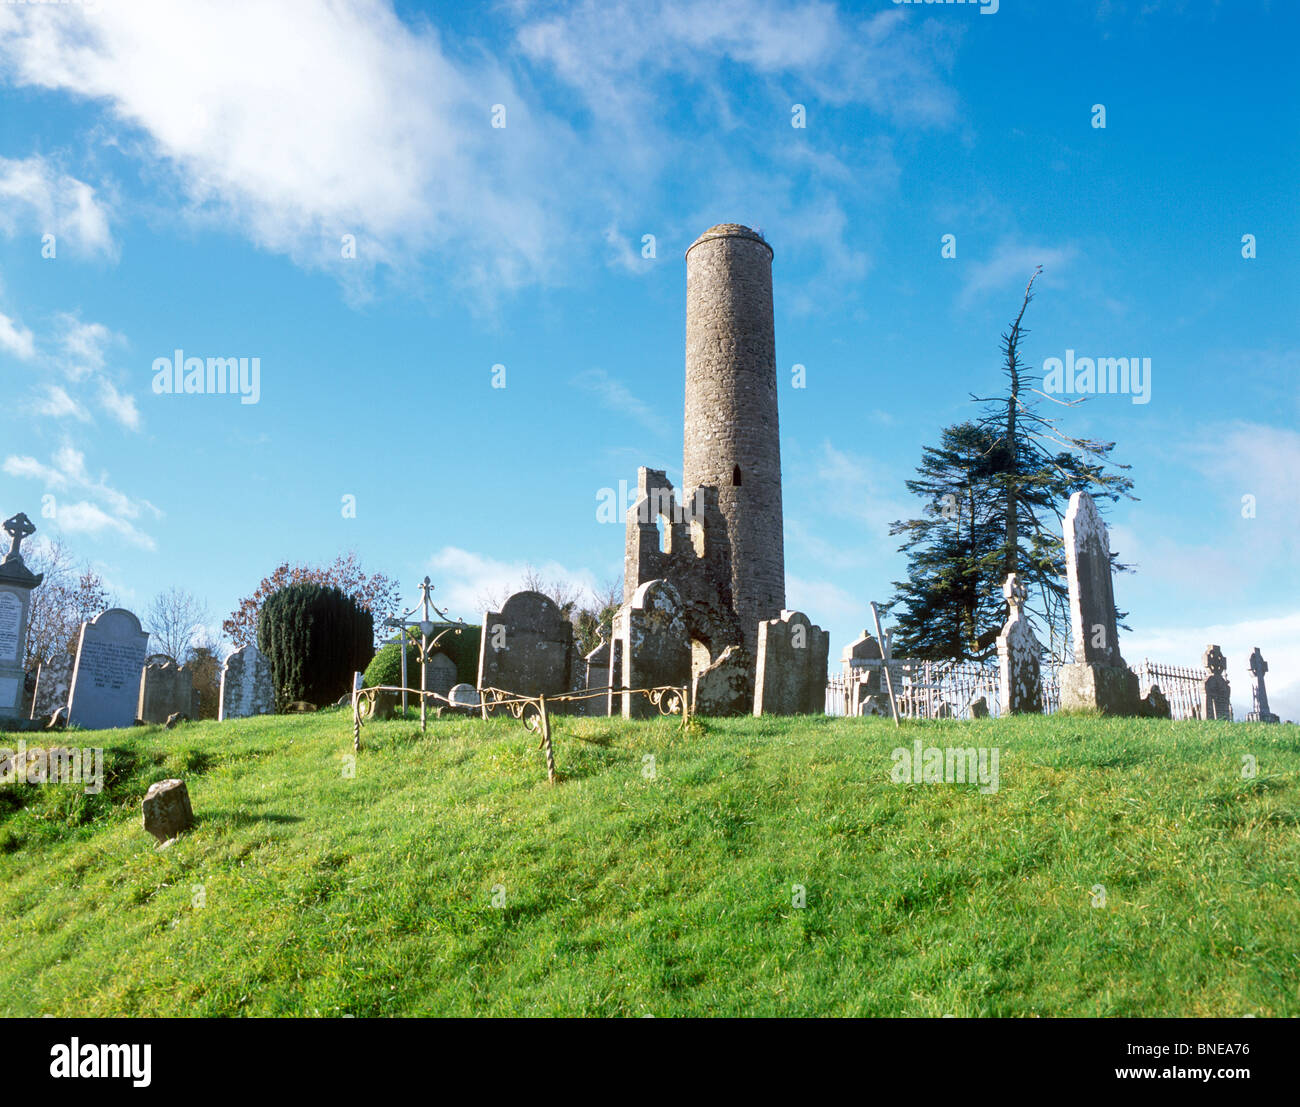 Low angle view of a tower in a cemetery, Donaghmore Round Tower, Navan, County Meath, Leinster Province, Republic of Ireland Stock Photo